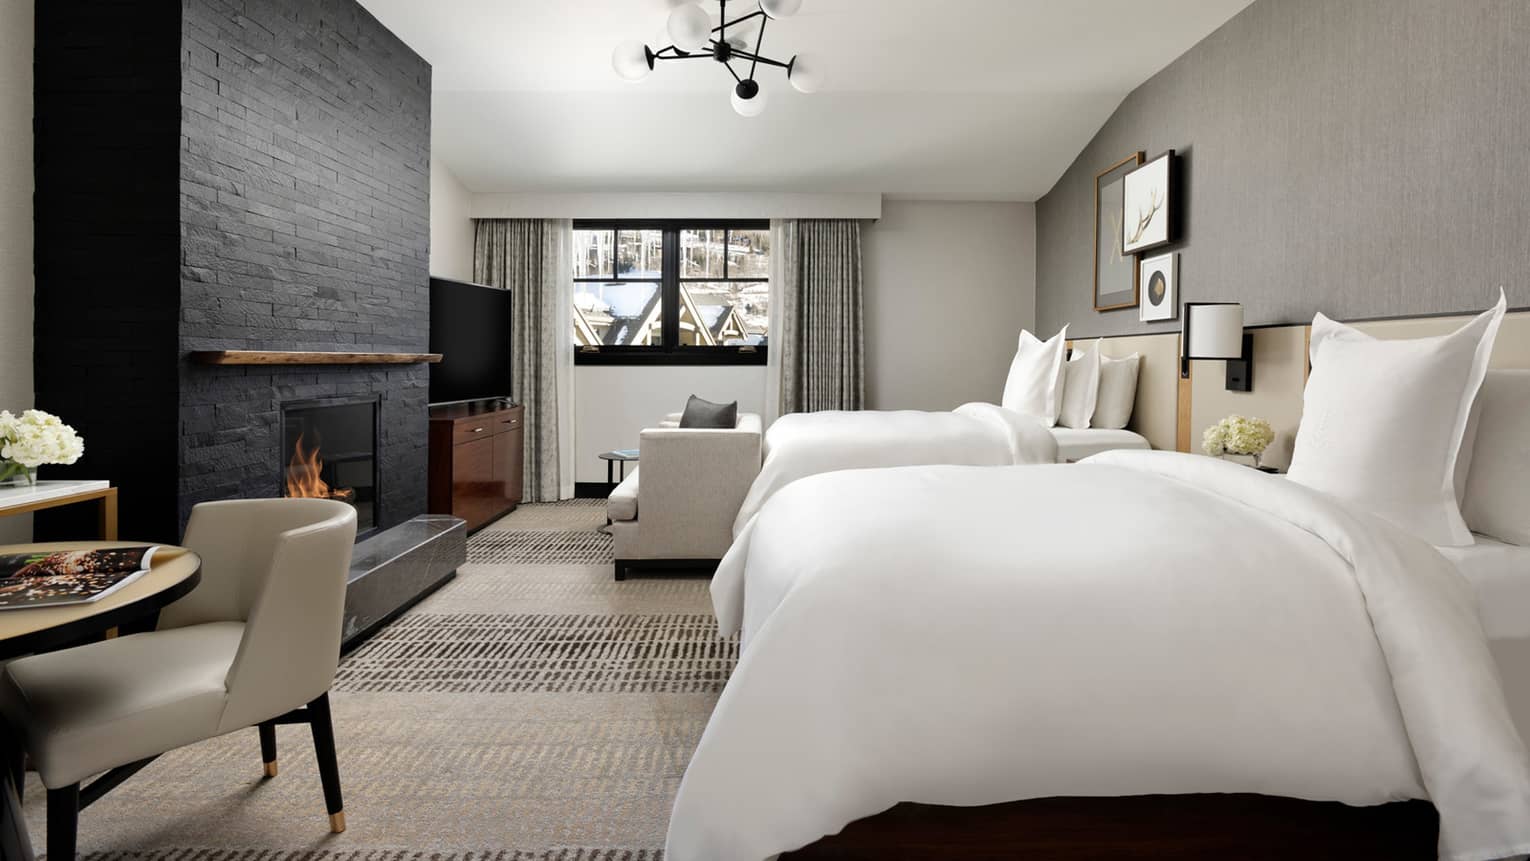 Hotel room with grey walls, black stone fireplace, two white double beds, arm chair